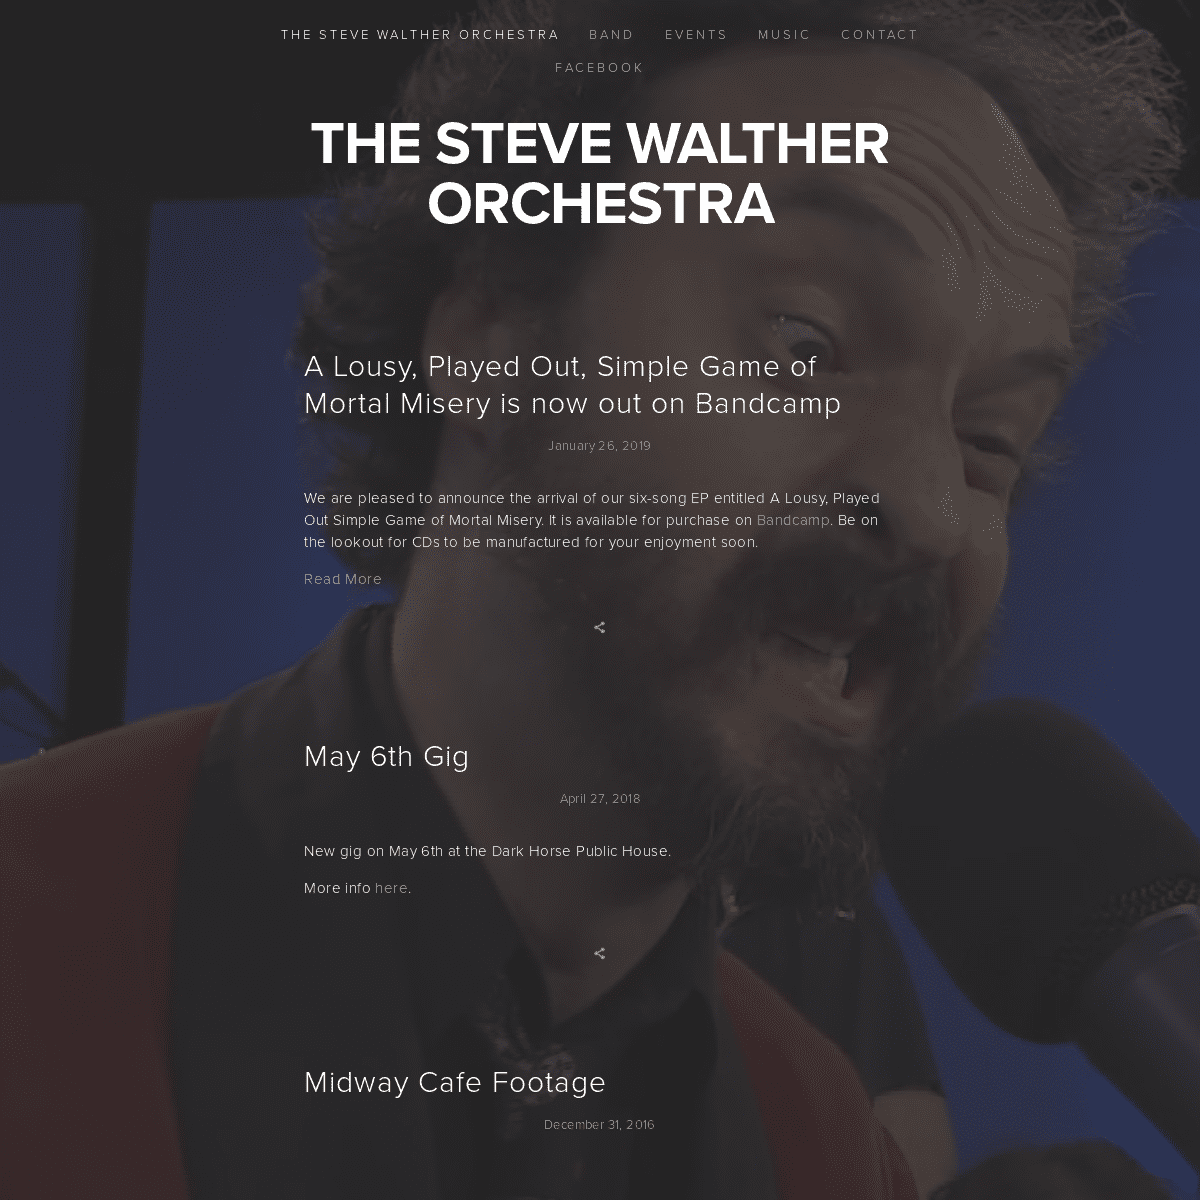 The Steve Walther Orchestra